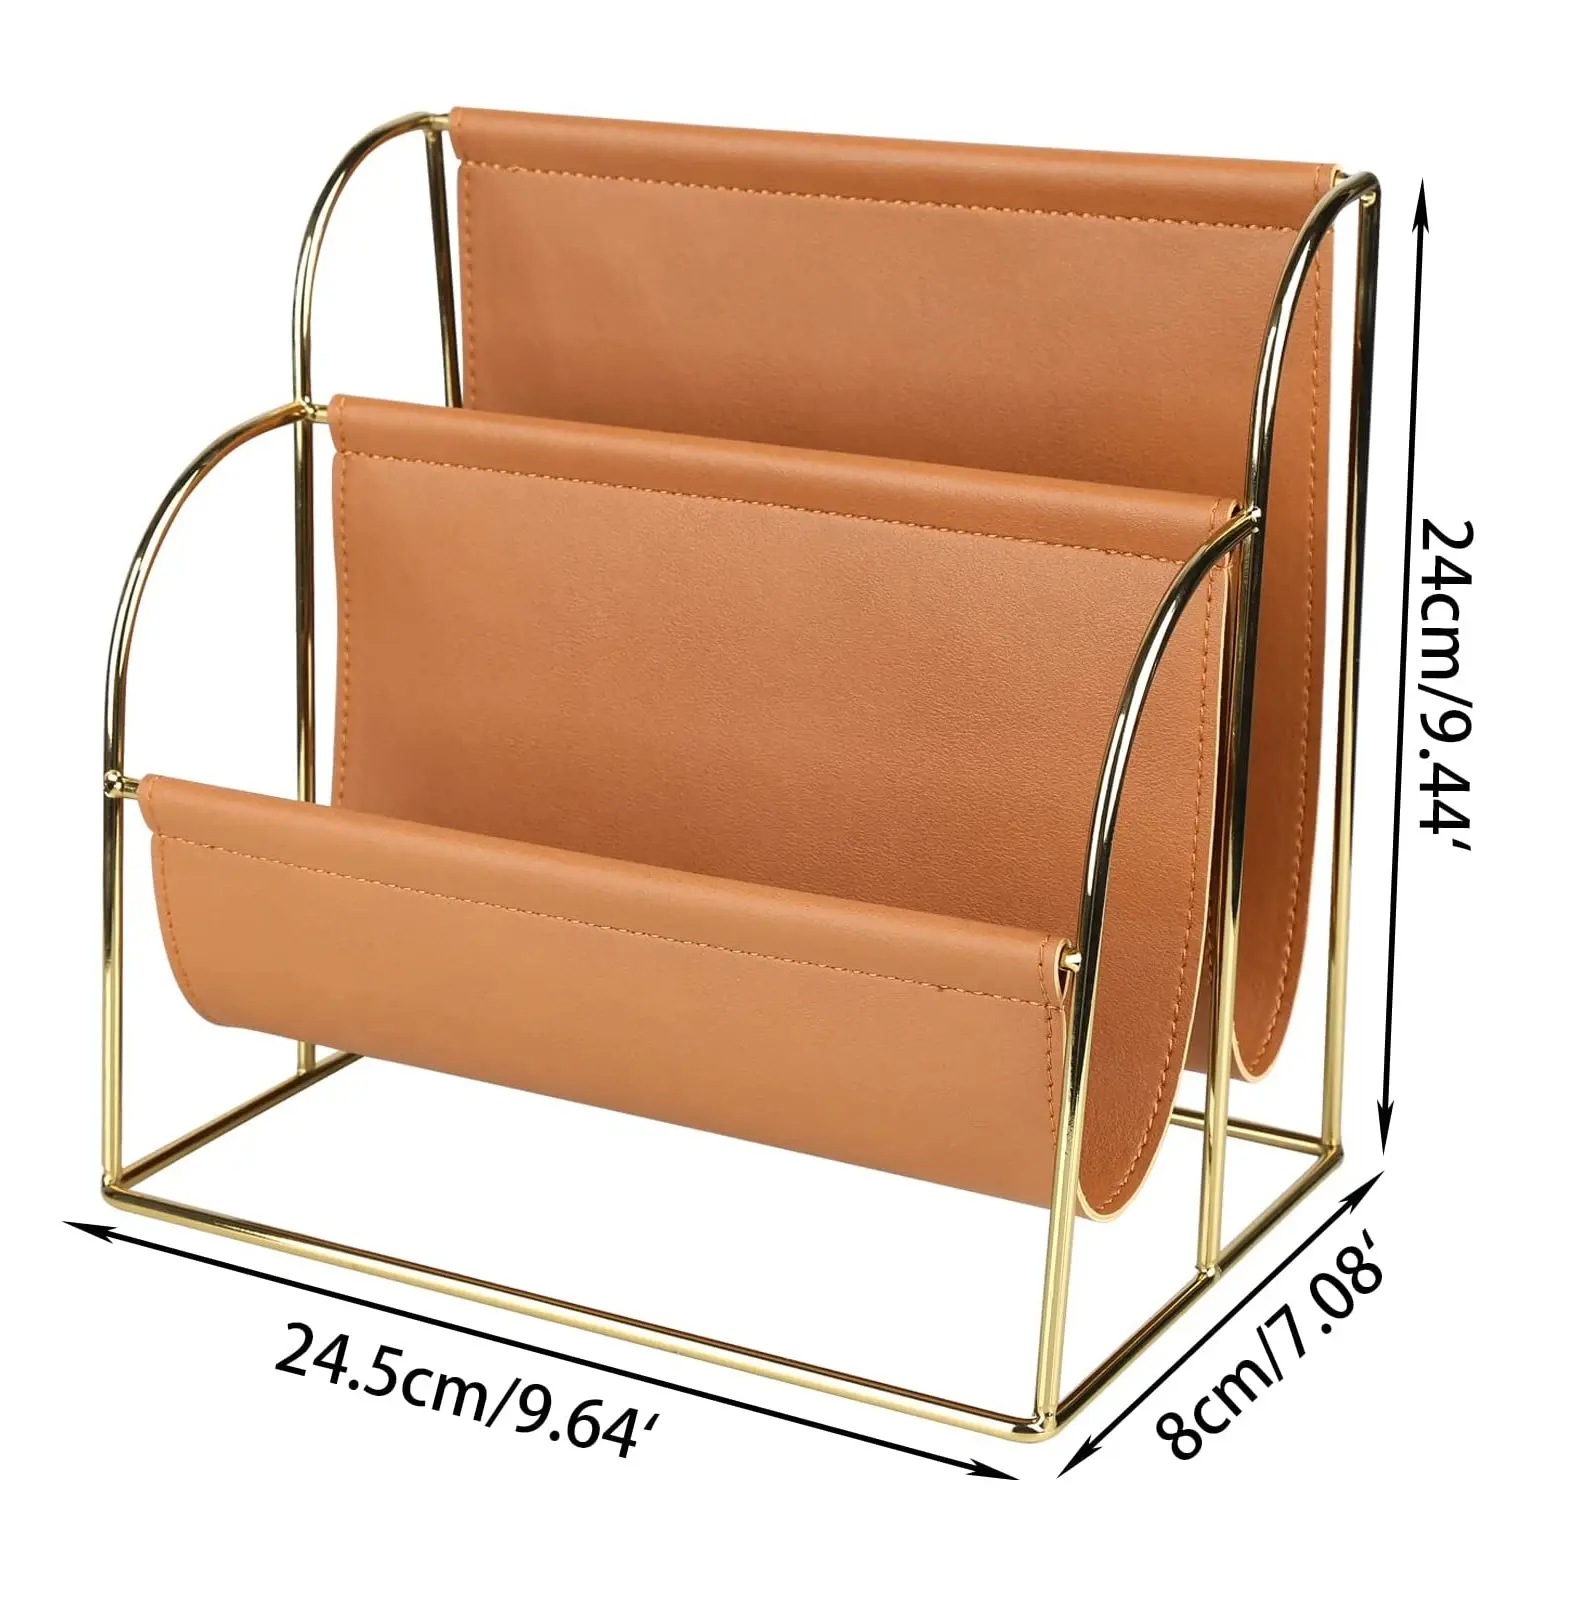 Metal and Leather Magazine rack with 3 Slots for tableware and floor books & Magazines holder genuine leather rack At Low Price